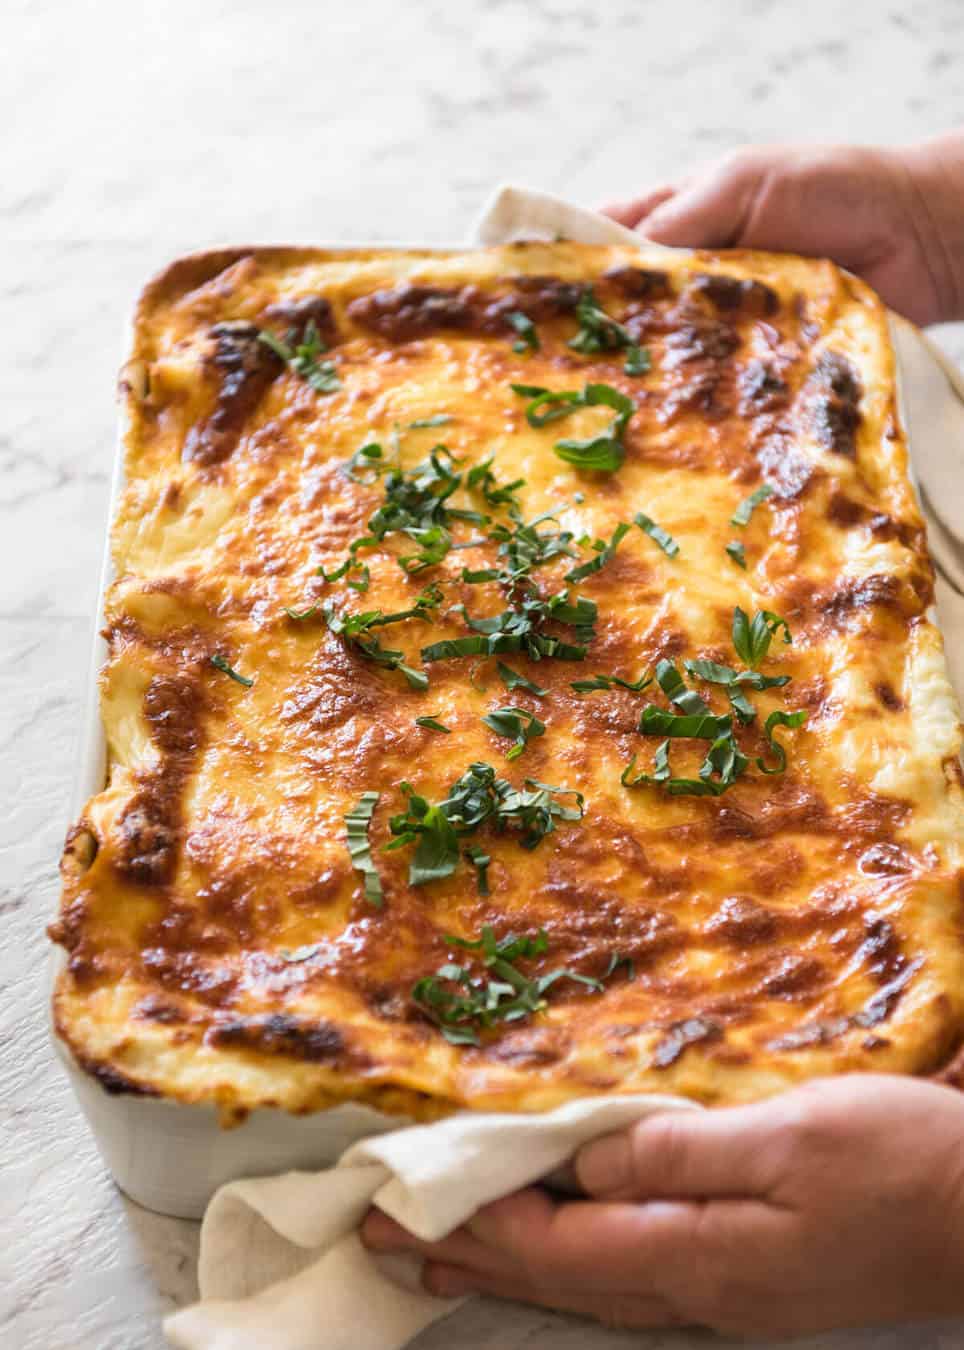 A homemade Lasagna is a thing of beauty! This is a traditional Italian Lasagna, made with a Bolognese Ragu and cheese sauce / béchamel sauce. No ricotta in sight! recipetineats.com